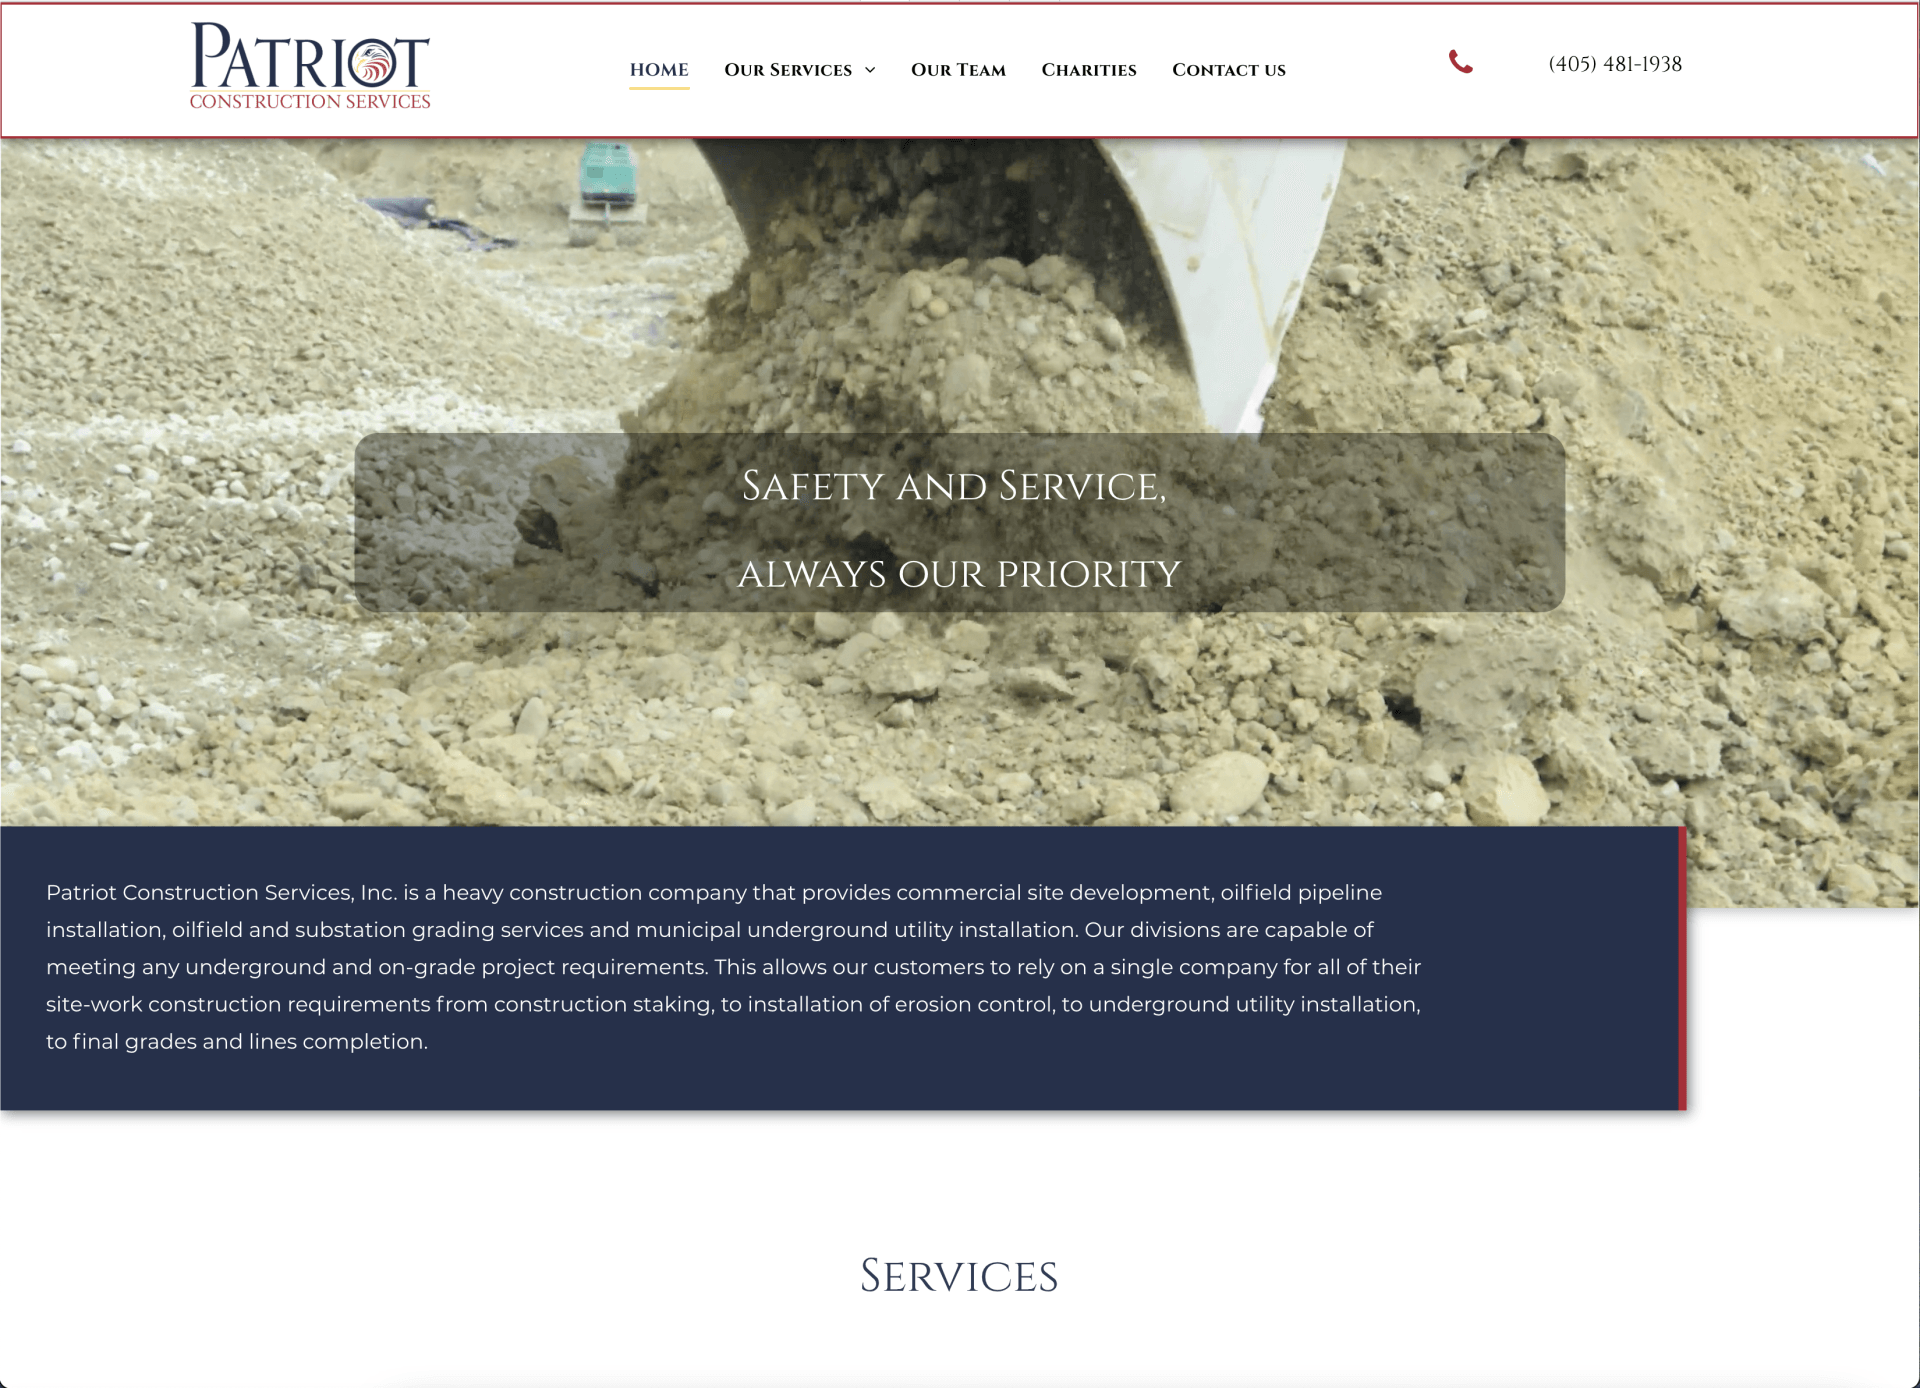 A screenshot of a website for patriot safety and service